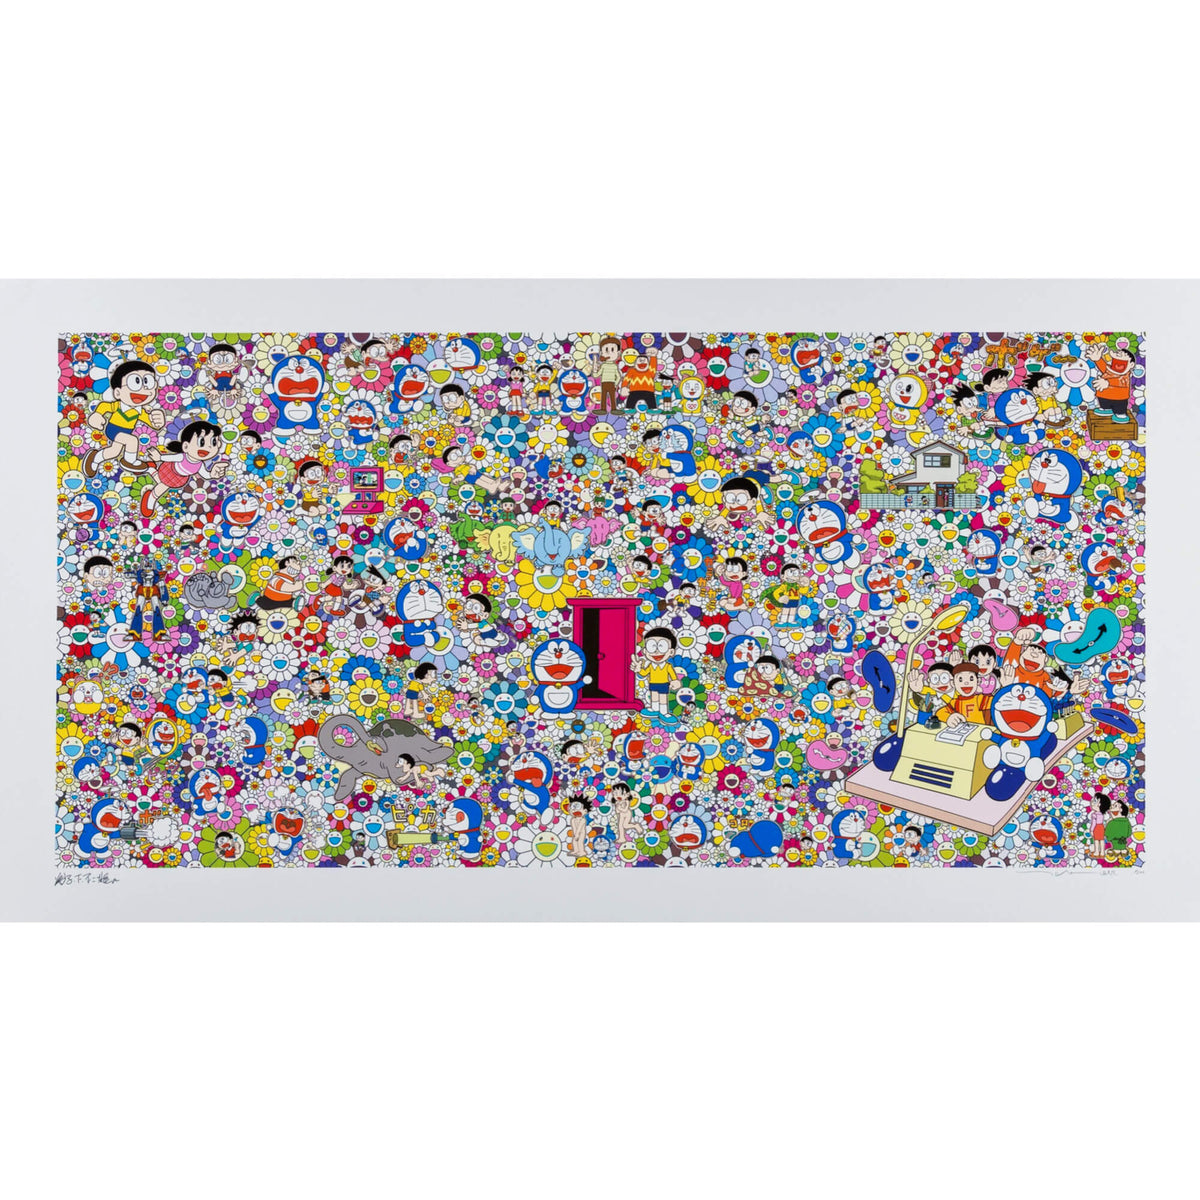 Takashi Murakami You can go anywhere! Such a blue sky! Print (Signed, Edition of 100)